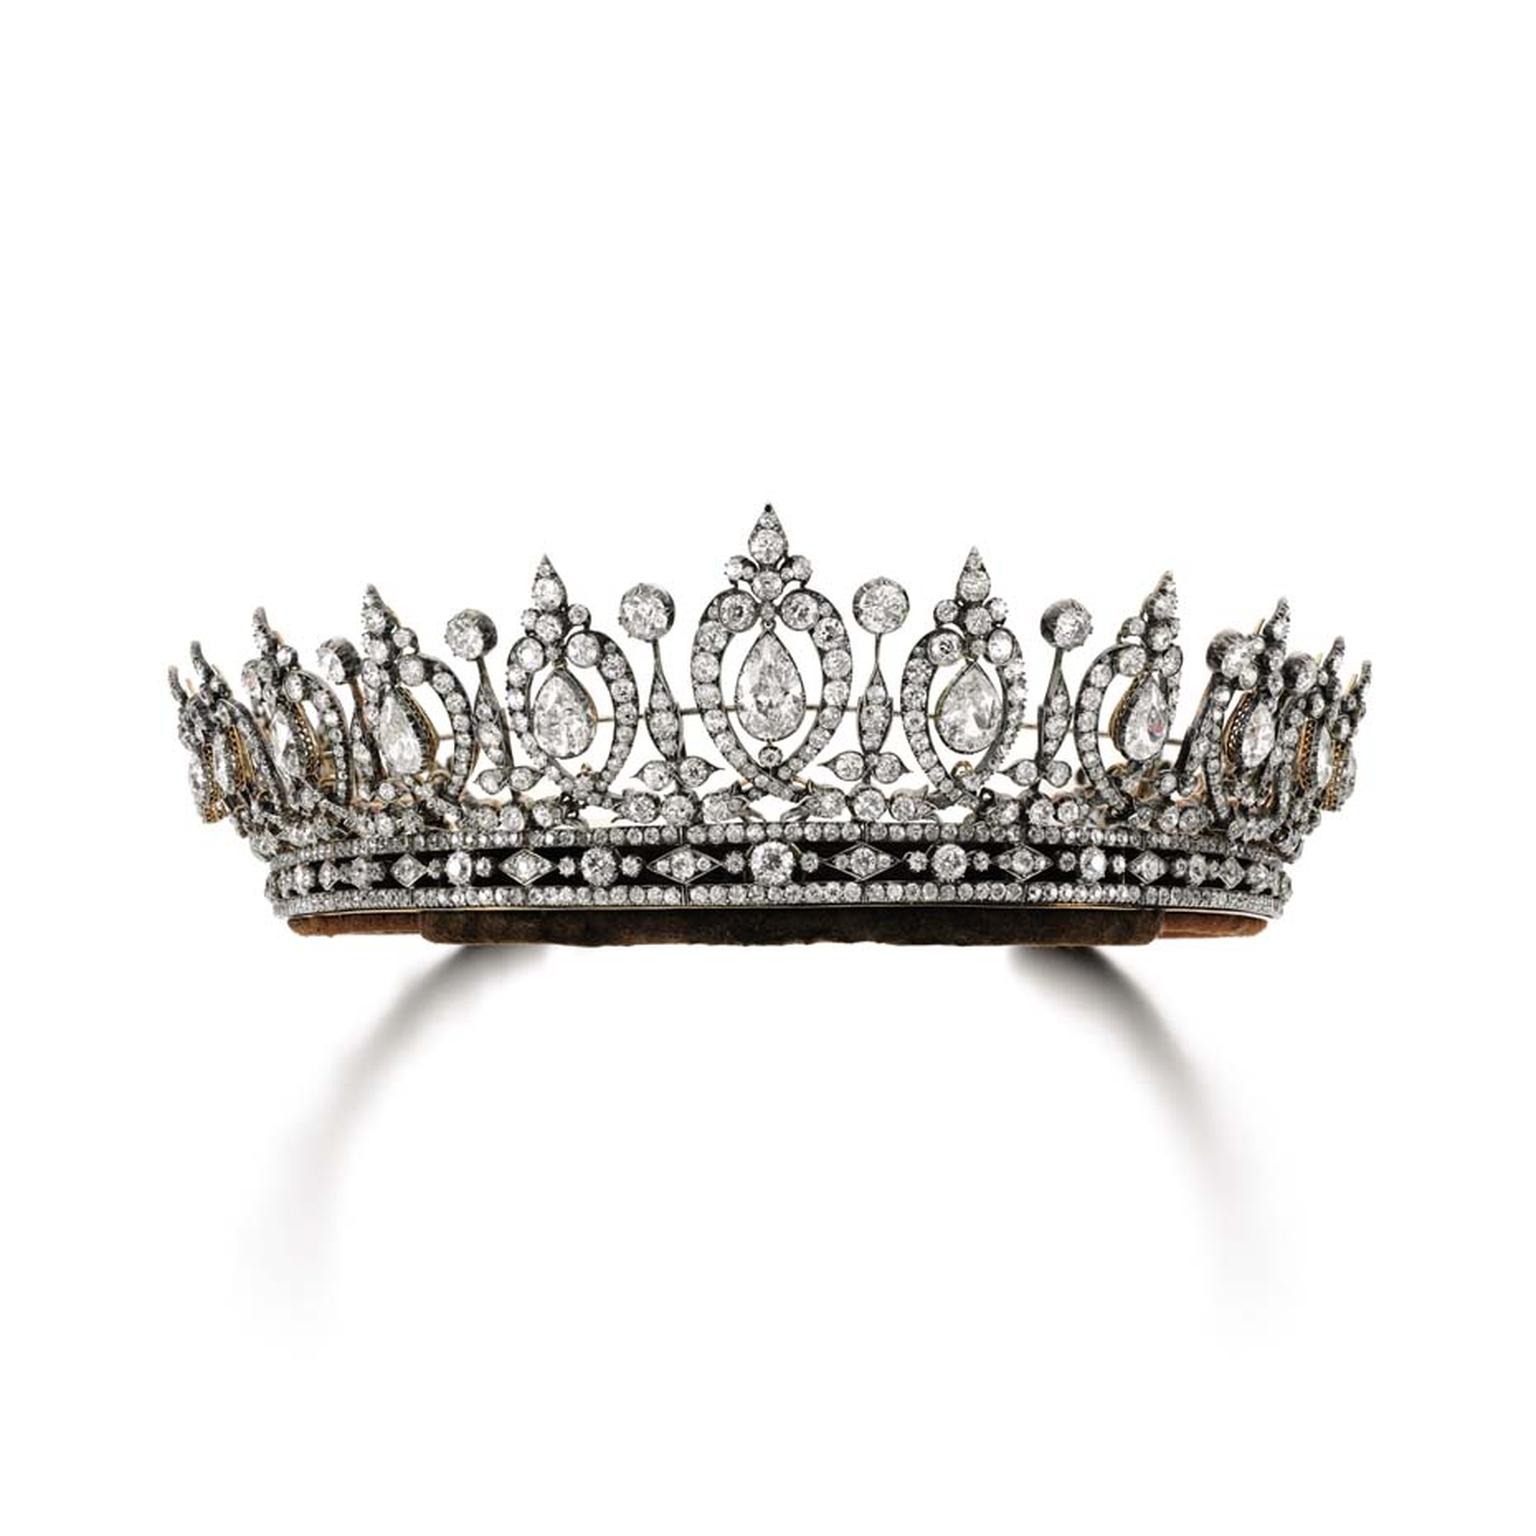 A 19th century diamond tiara belonging to the Duchess of Roxburghe went under the hammer for $848,326 after an intense bidding battle.